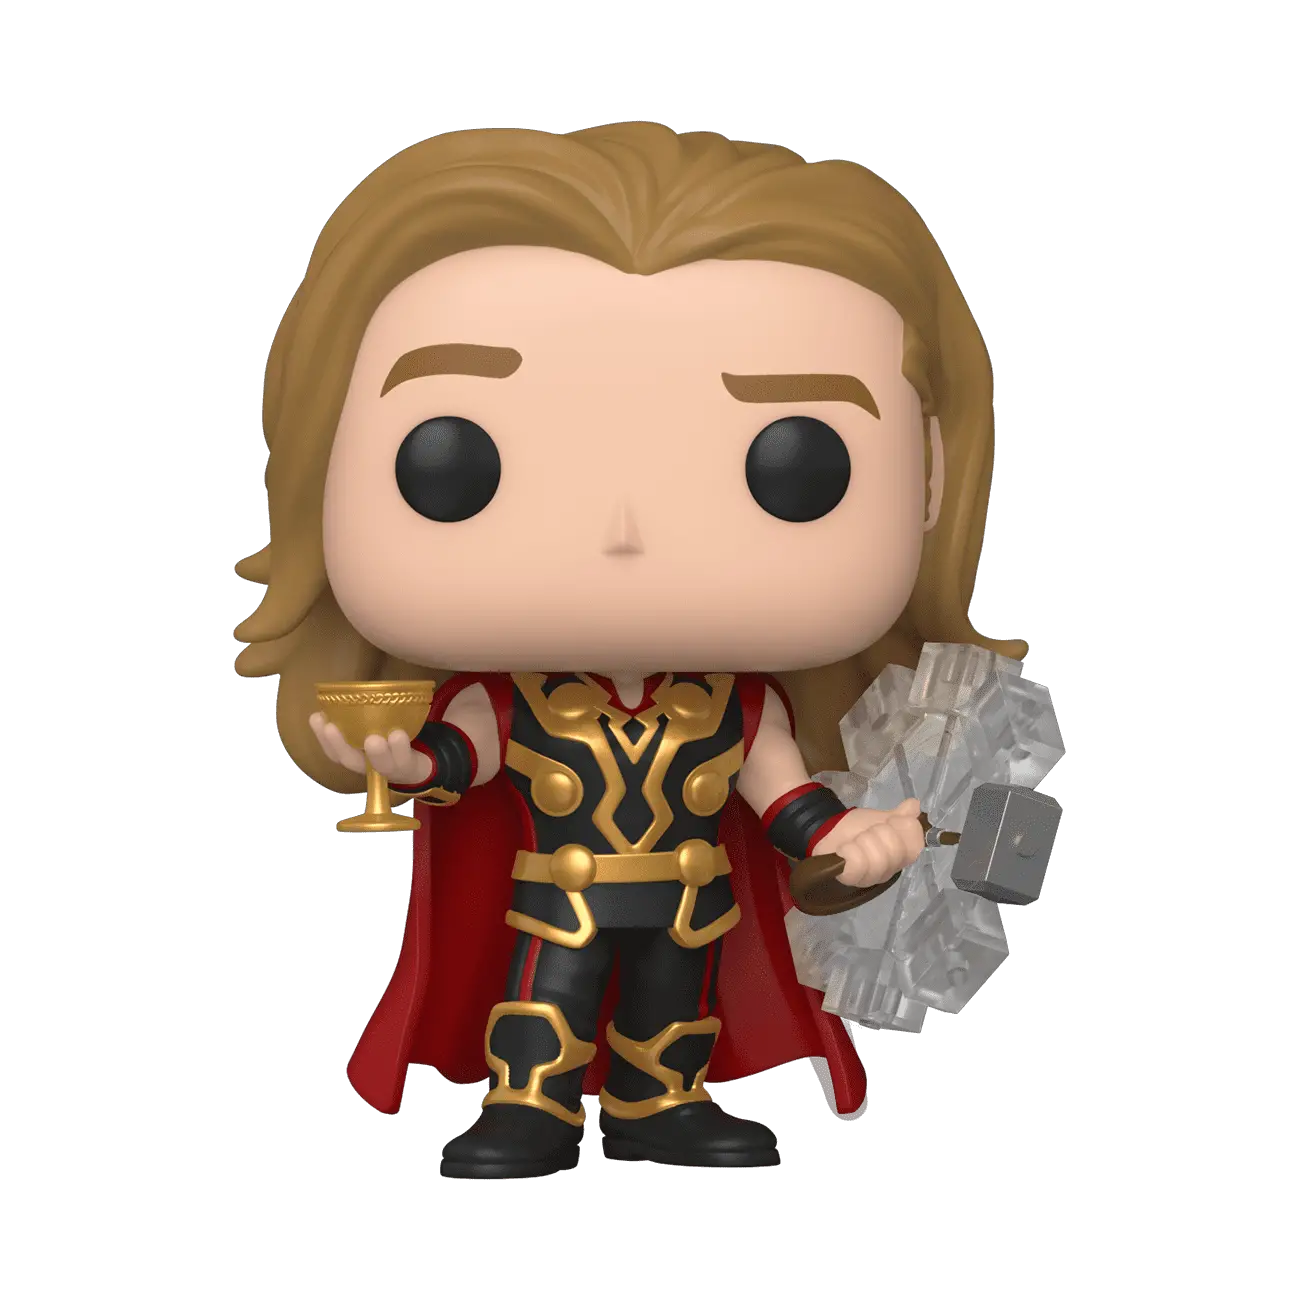 Thor Funko Pop - available exclusively at Walmart What If…?